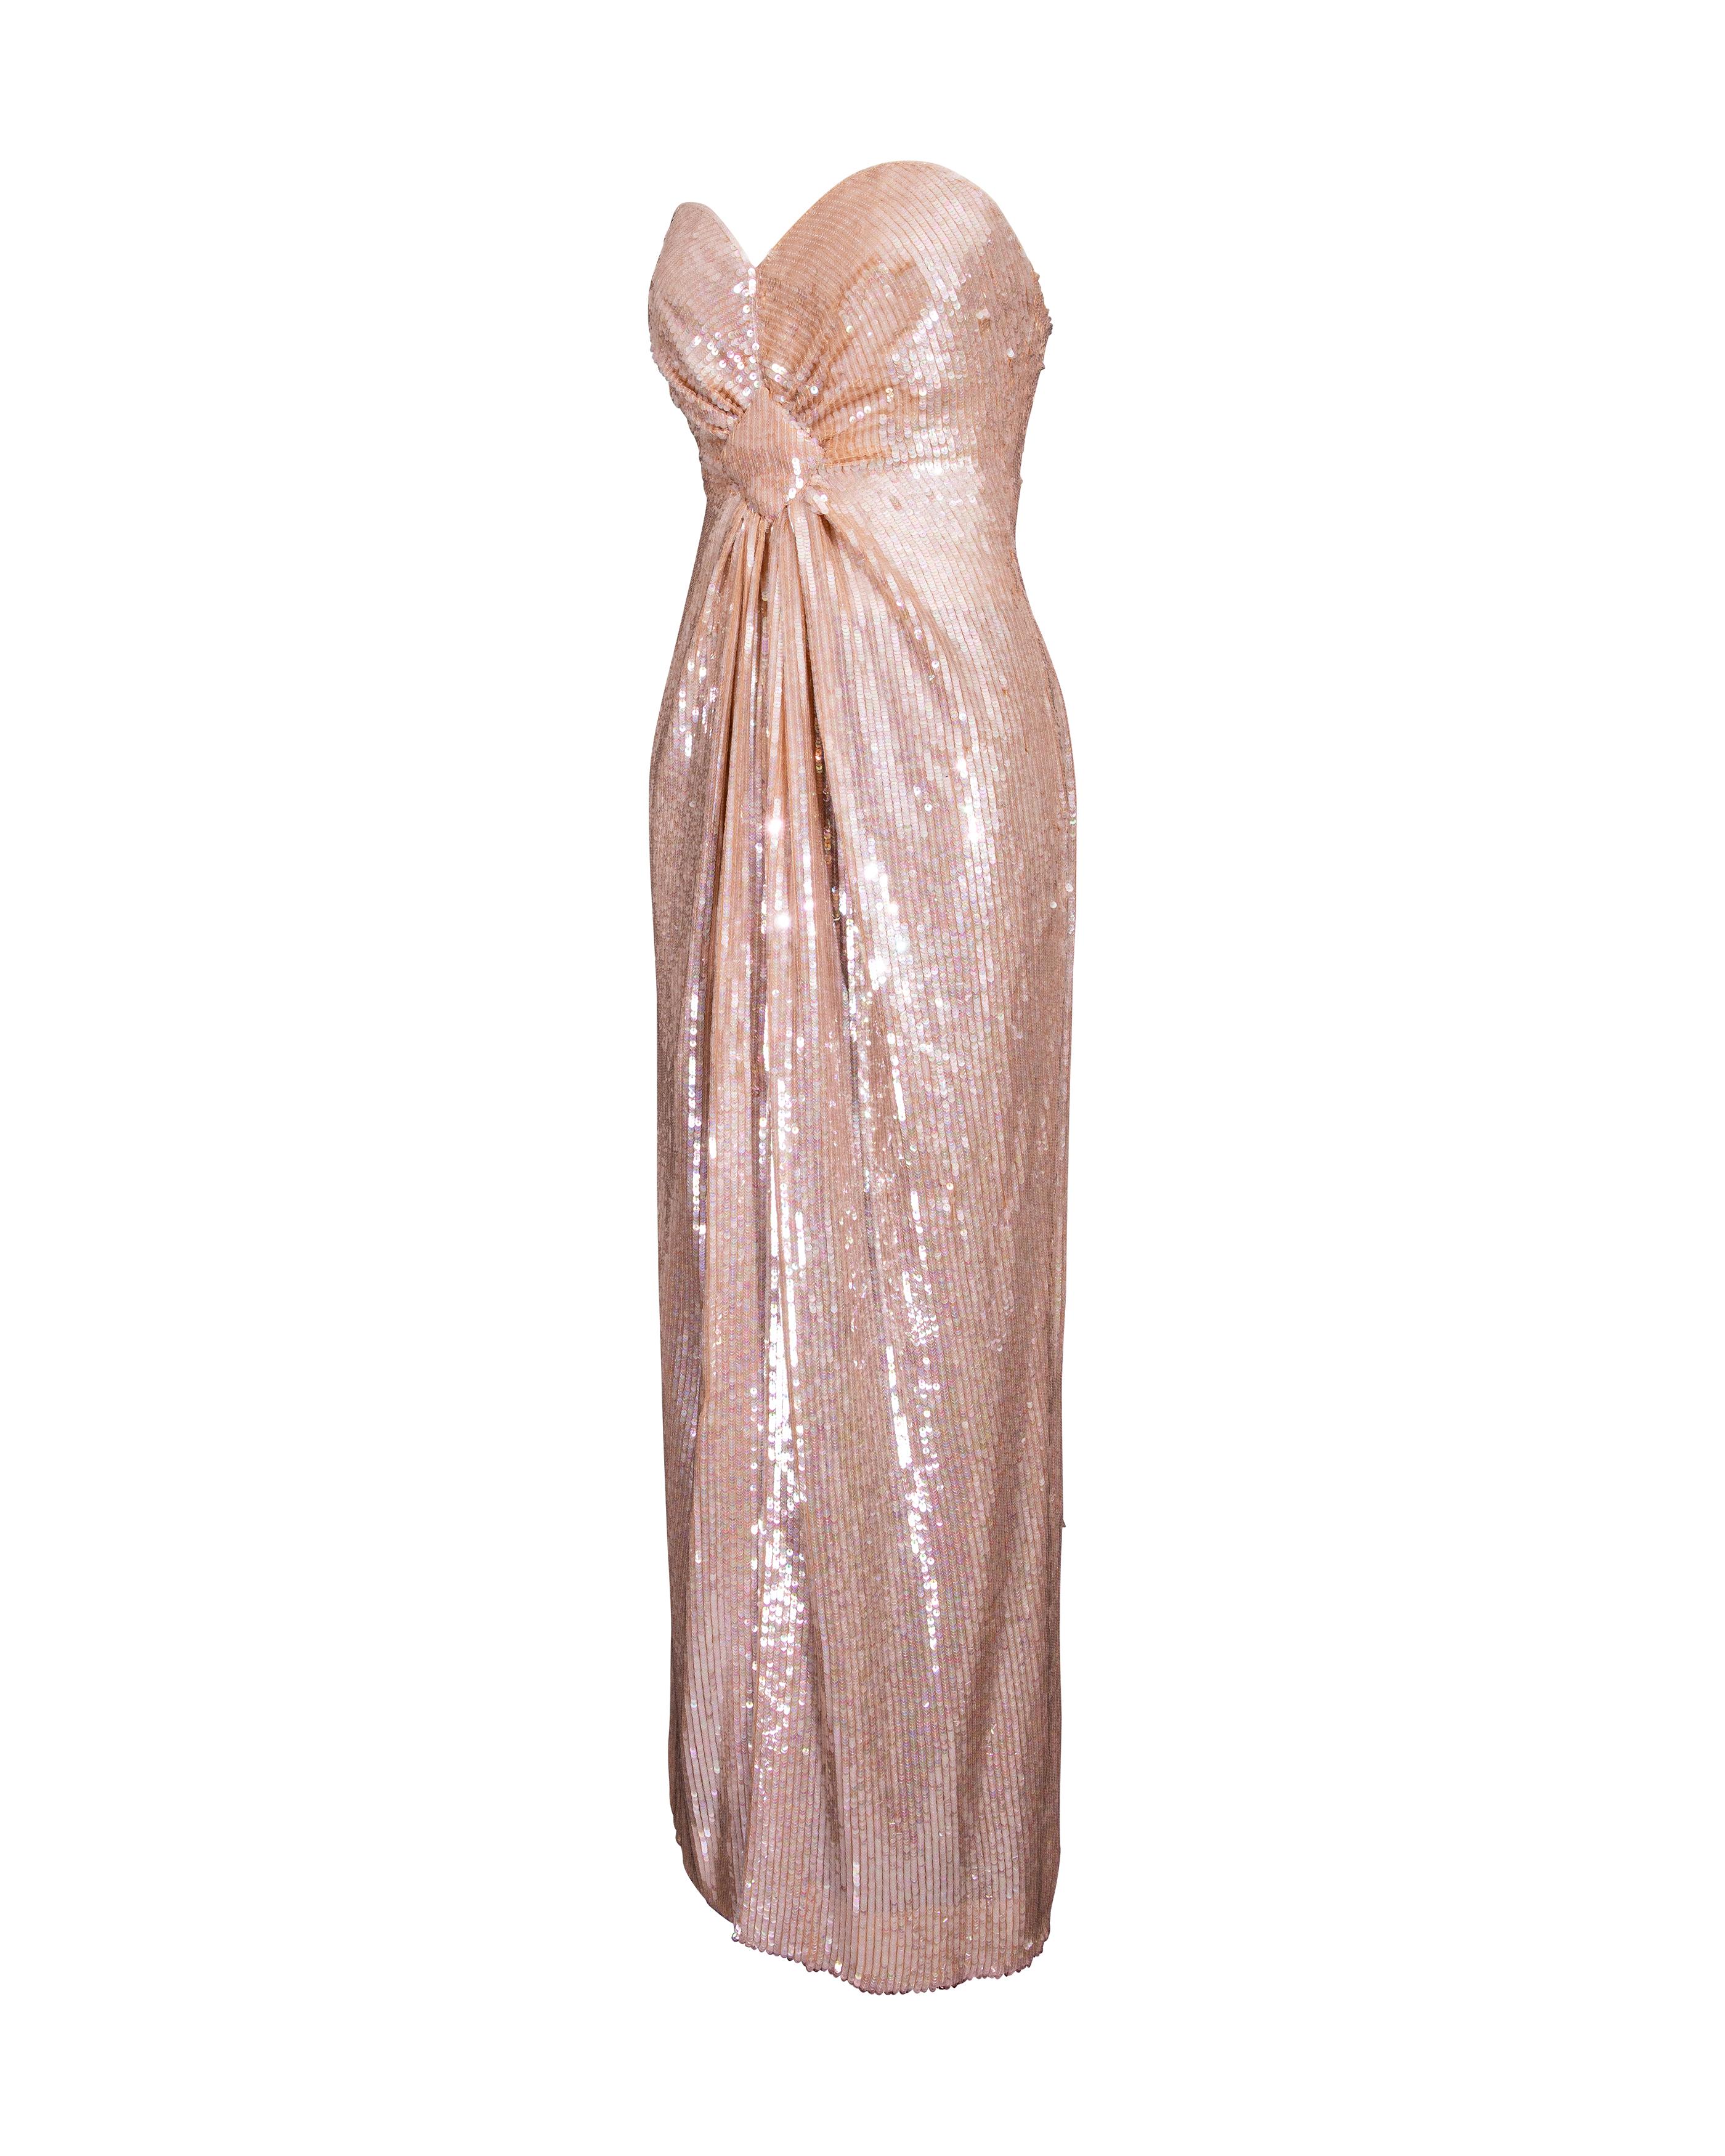 1980's John Anthony peach strapless fully sequined sheath gown with geometric center gathered detail. Built-in boning, waist belt and concealed back zip closure, with moderate length front slit. Fully lined with tan Rayon lining. In very good